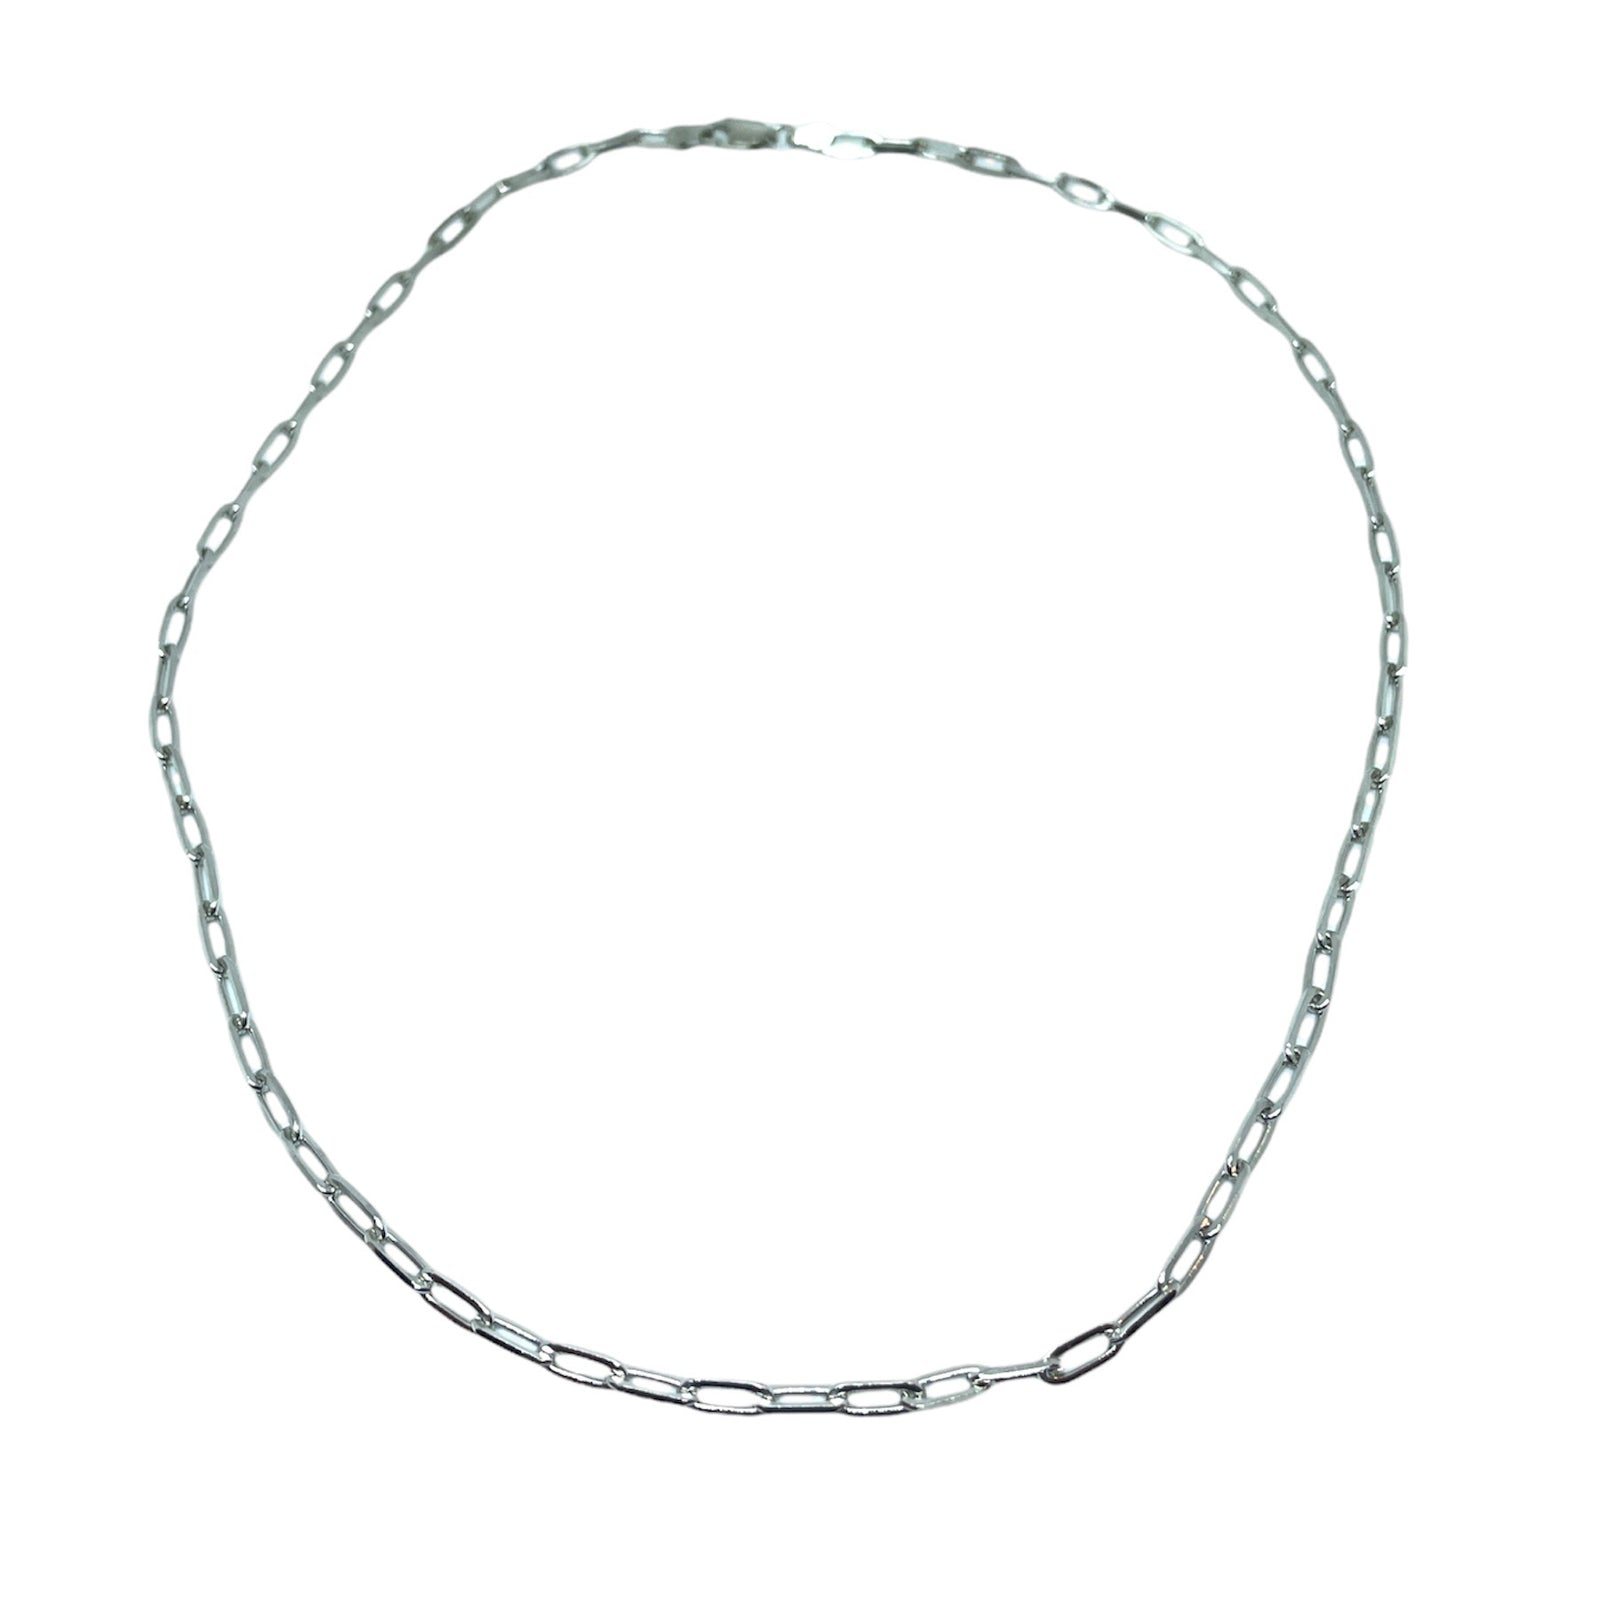 Medium thick Paperclip necklace